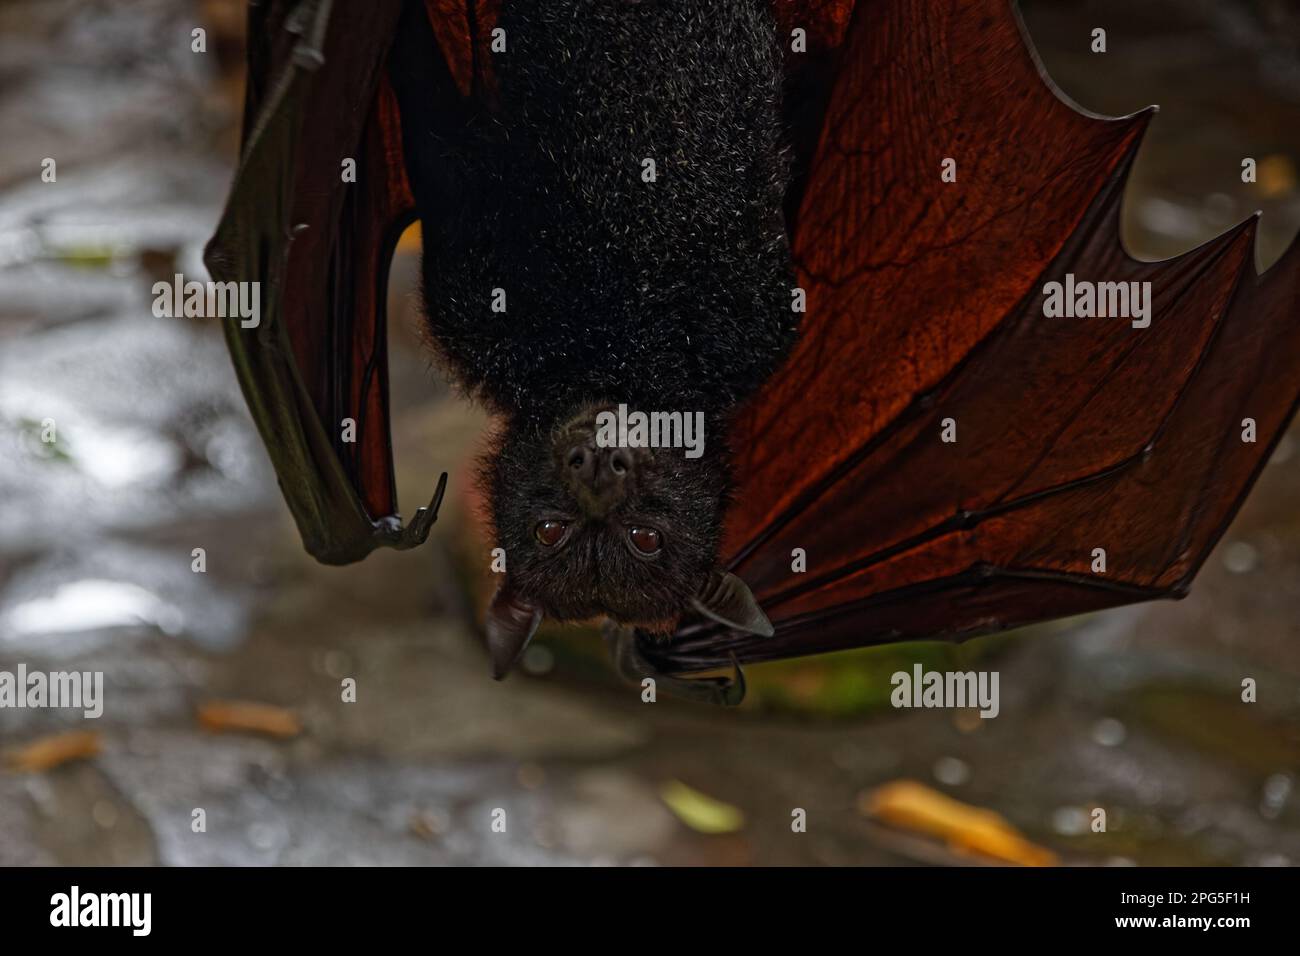 A giant fruit bat, also known as flying fox, hanging upside down in Bali, Indonesia Stock Photo